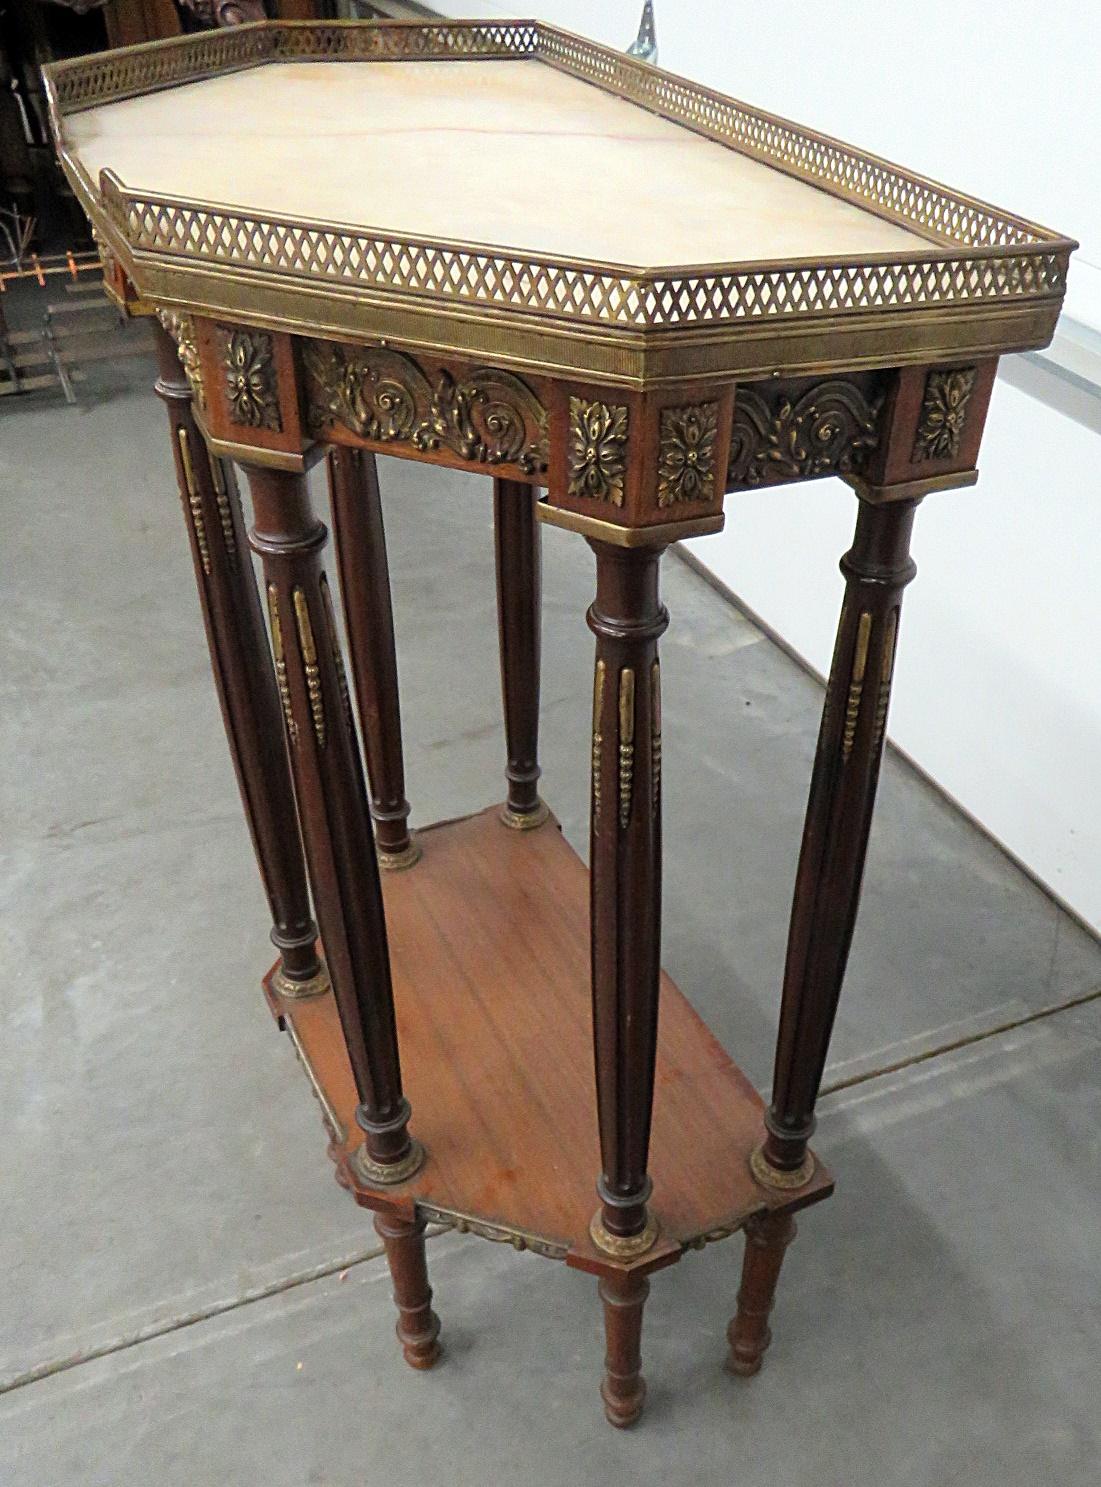 20th Century Regency Style Marble-Top Hall Table